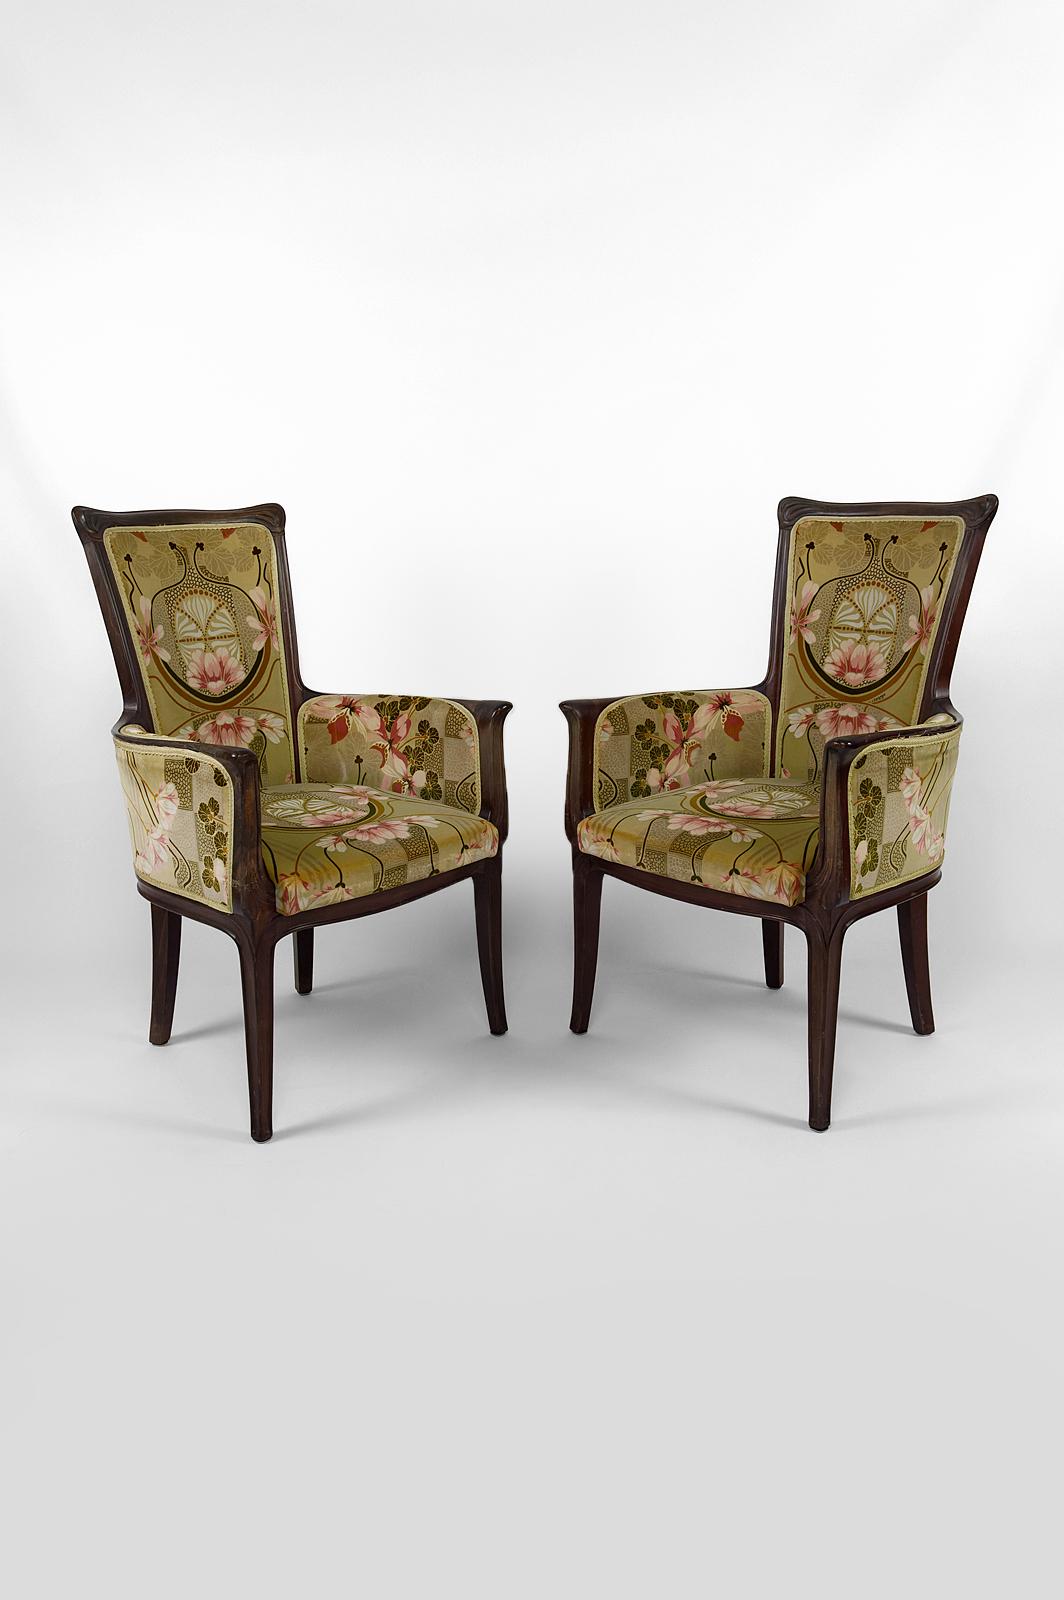 French Art Nouveau salon set of 3, 2 armchairs and 1 chair, France, Circa 1900 For Sale